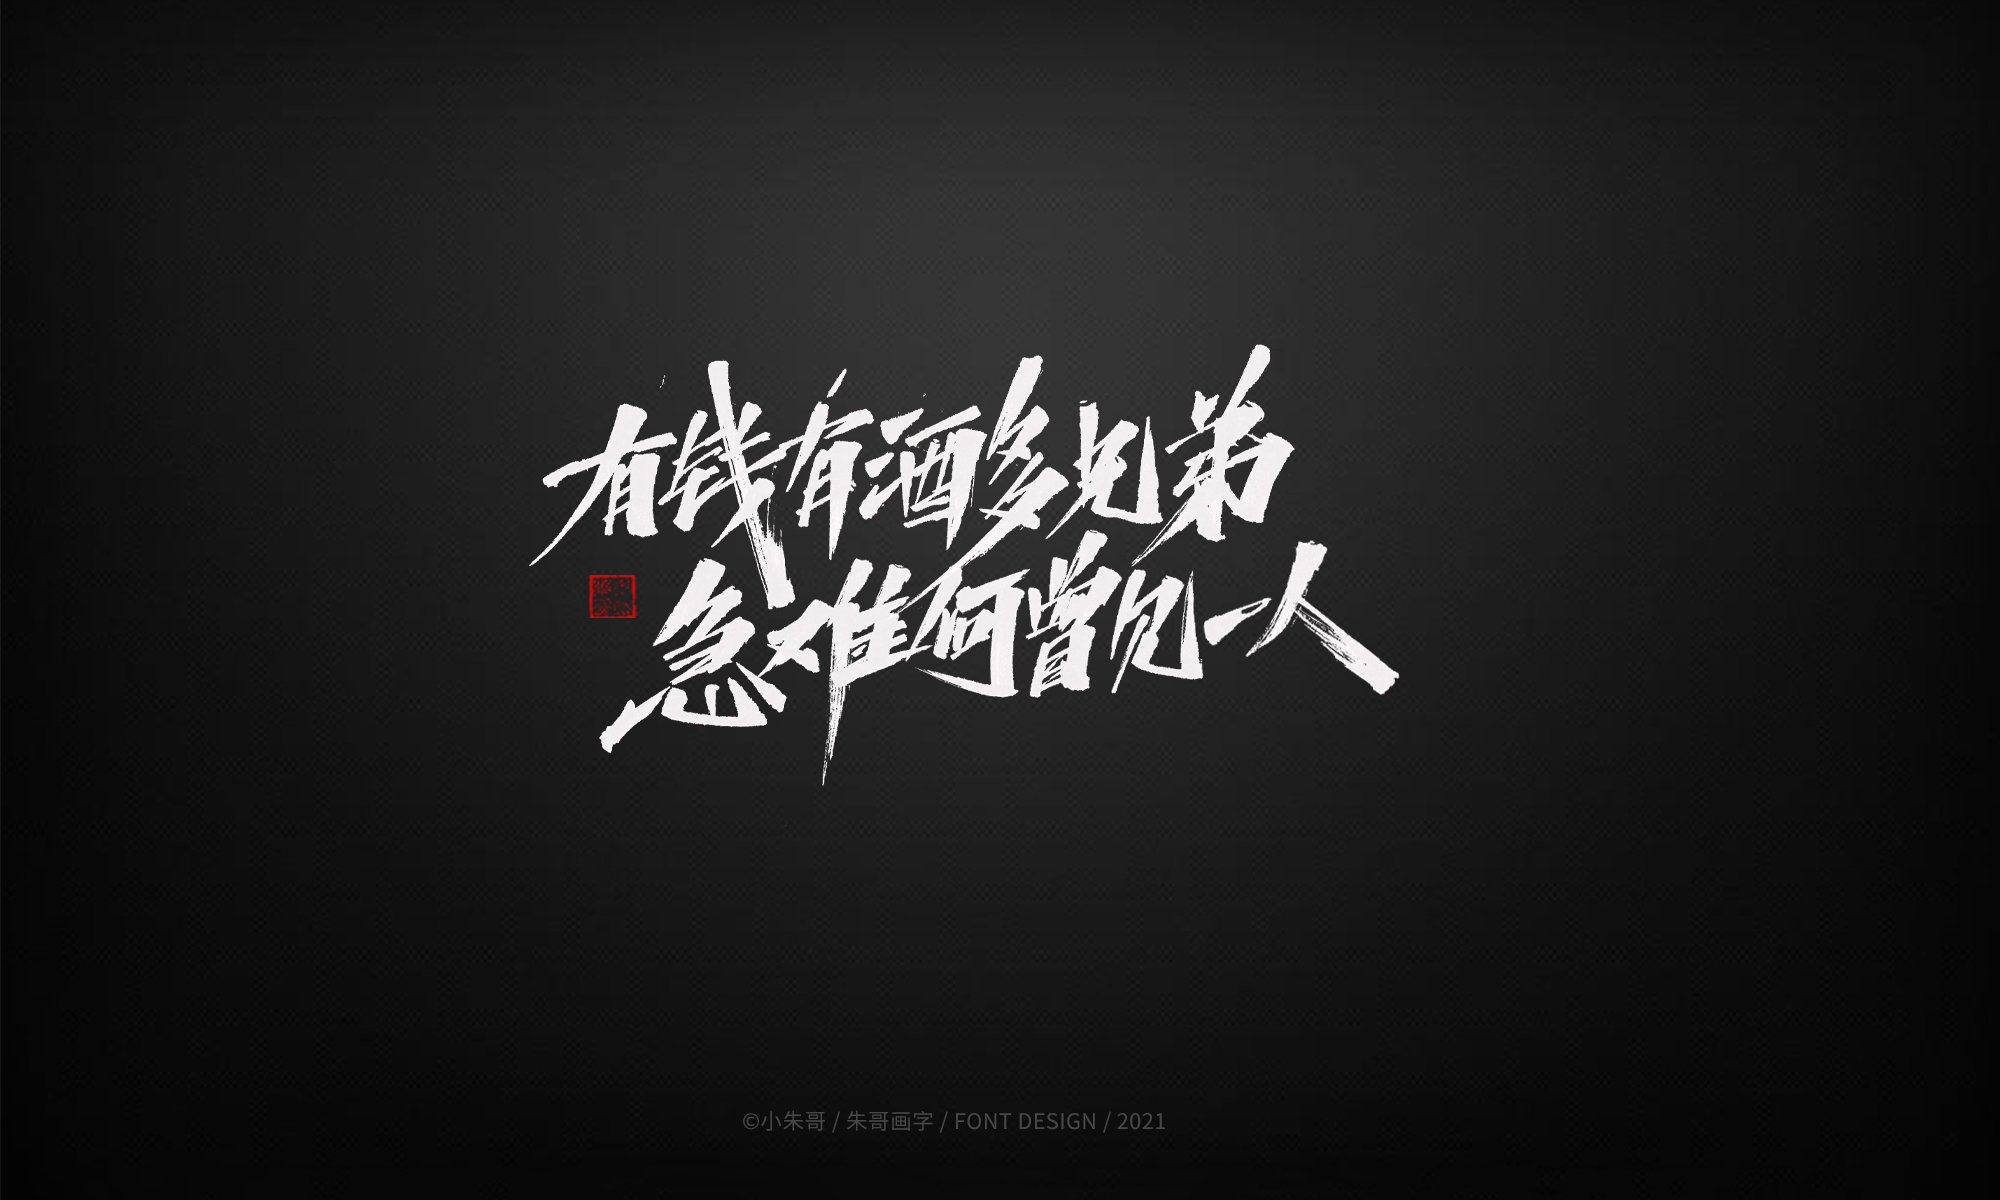 21P Collection of the latest Chinese font design schemes in 2021 #.67